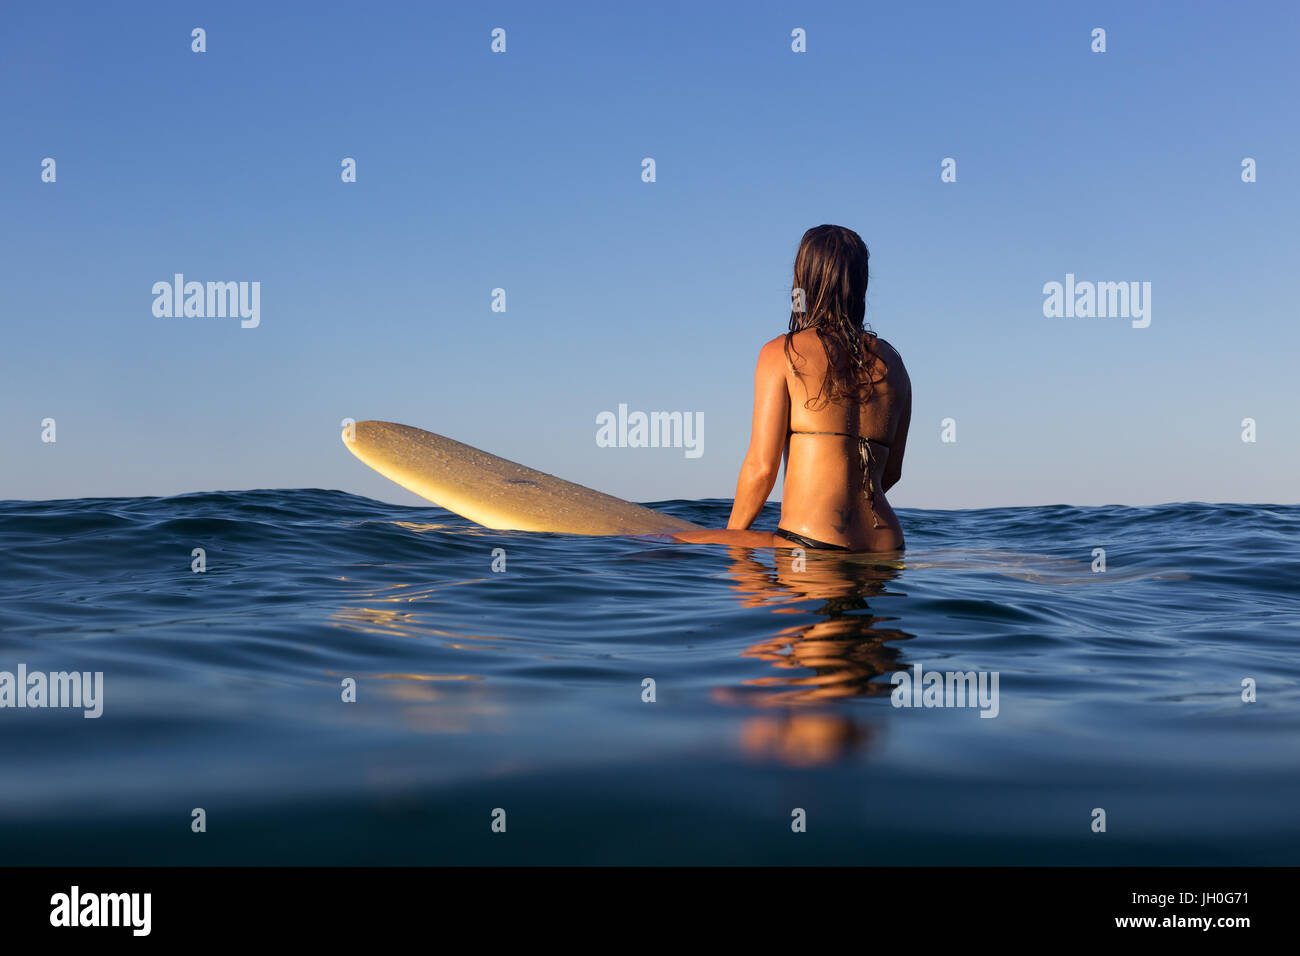 A surfer sits on her board and waits for a wave on a glassy calm ocean in Australia. Stock Photo